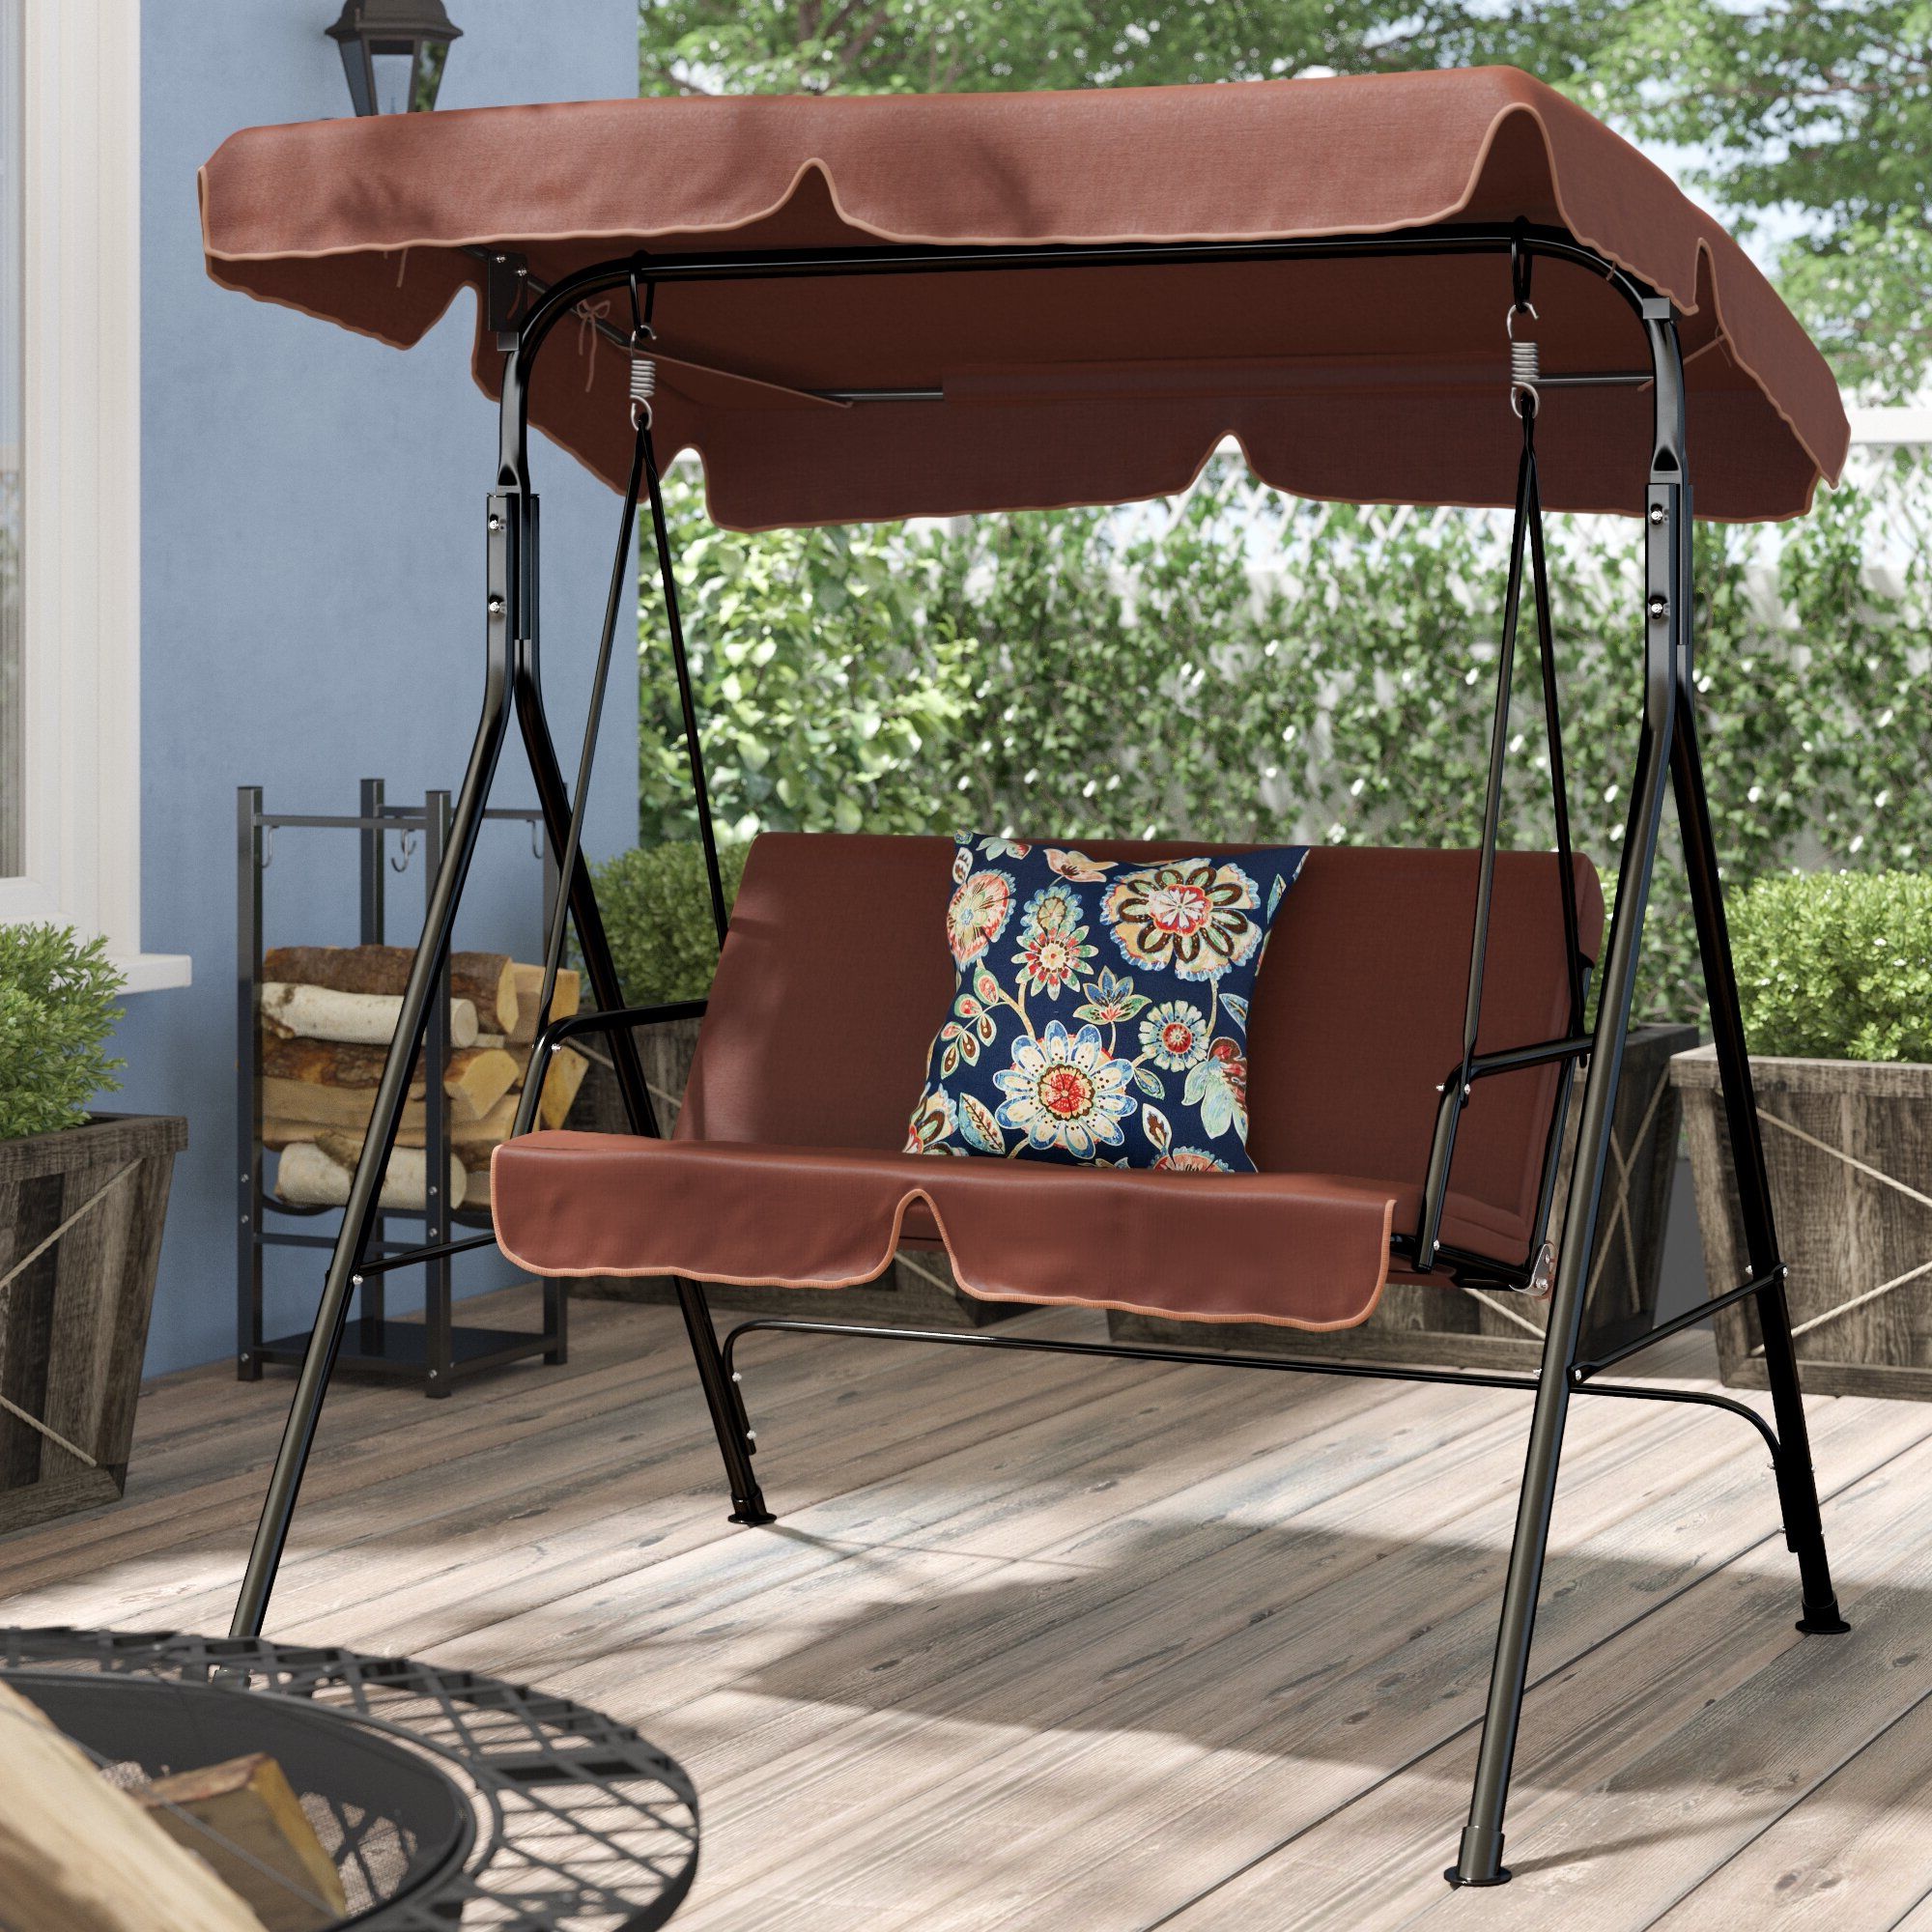 Patio Loveseat Canopy Hammock Porch Swings With Stand Pertaining To Well Known Mansour Patio Loveseat Canopy Hammock Porch Swing With Stand (View 8 of 30)